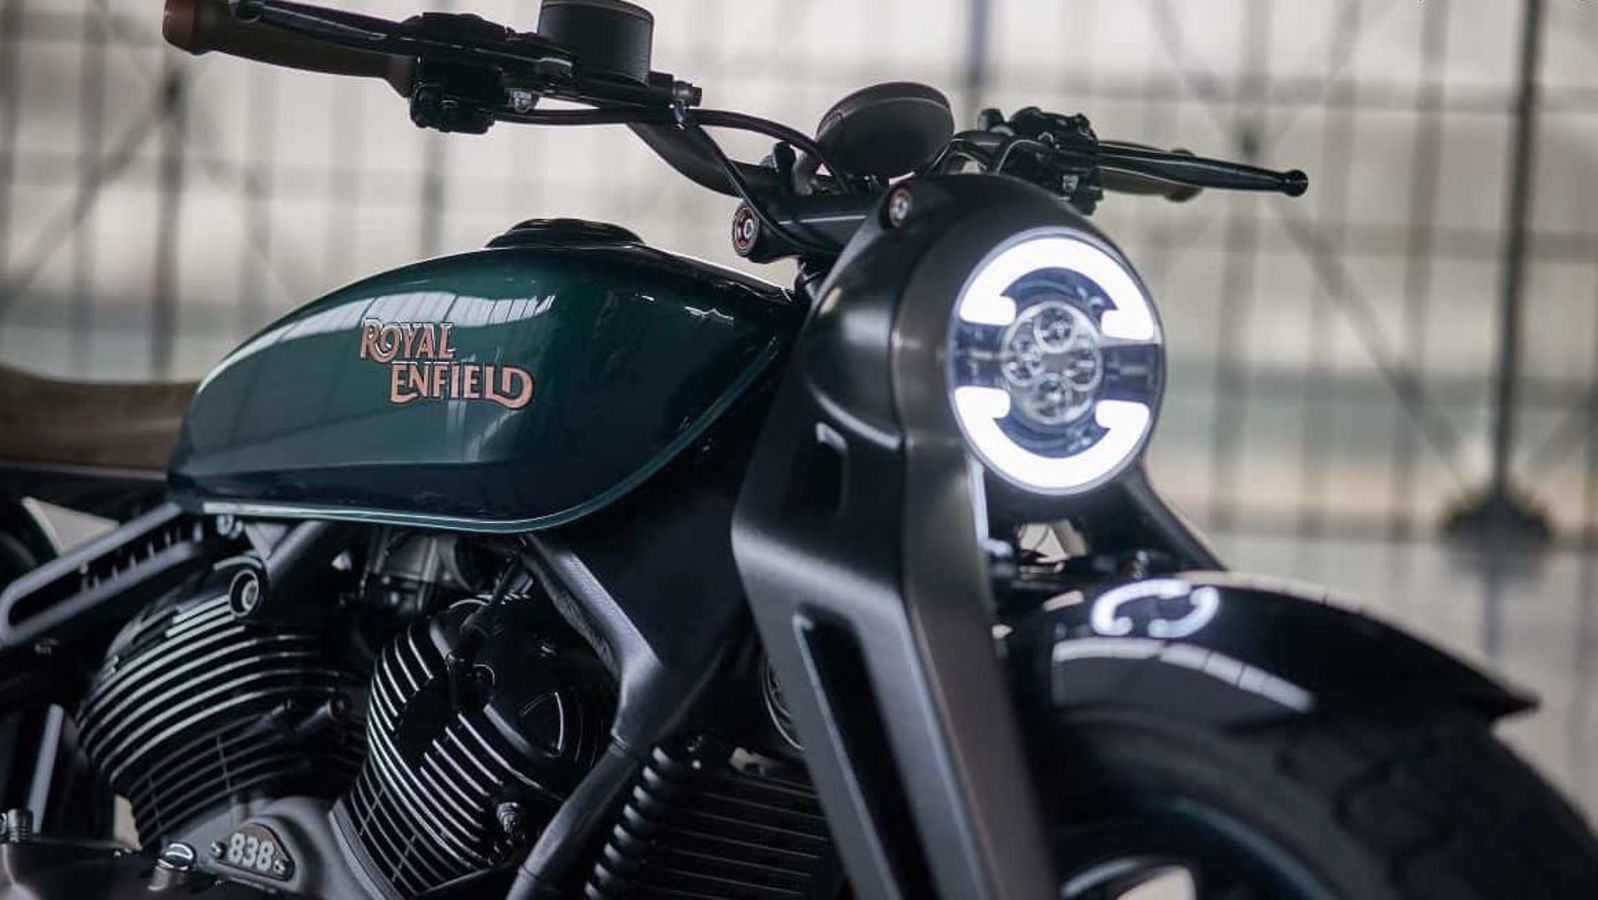 Expect 'highest number of new models' from Royal Enfield in FY ...